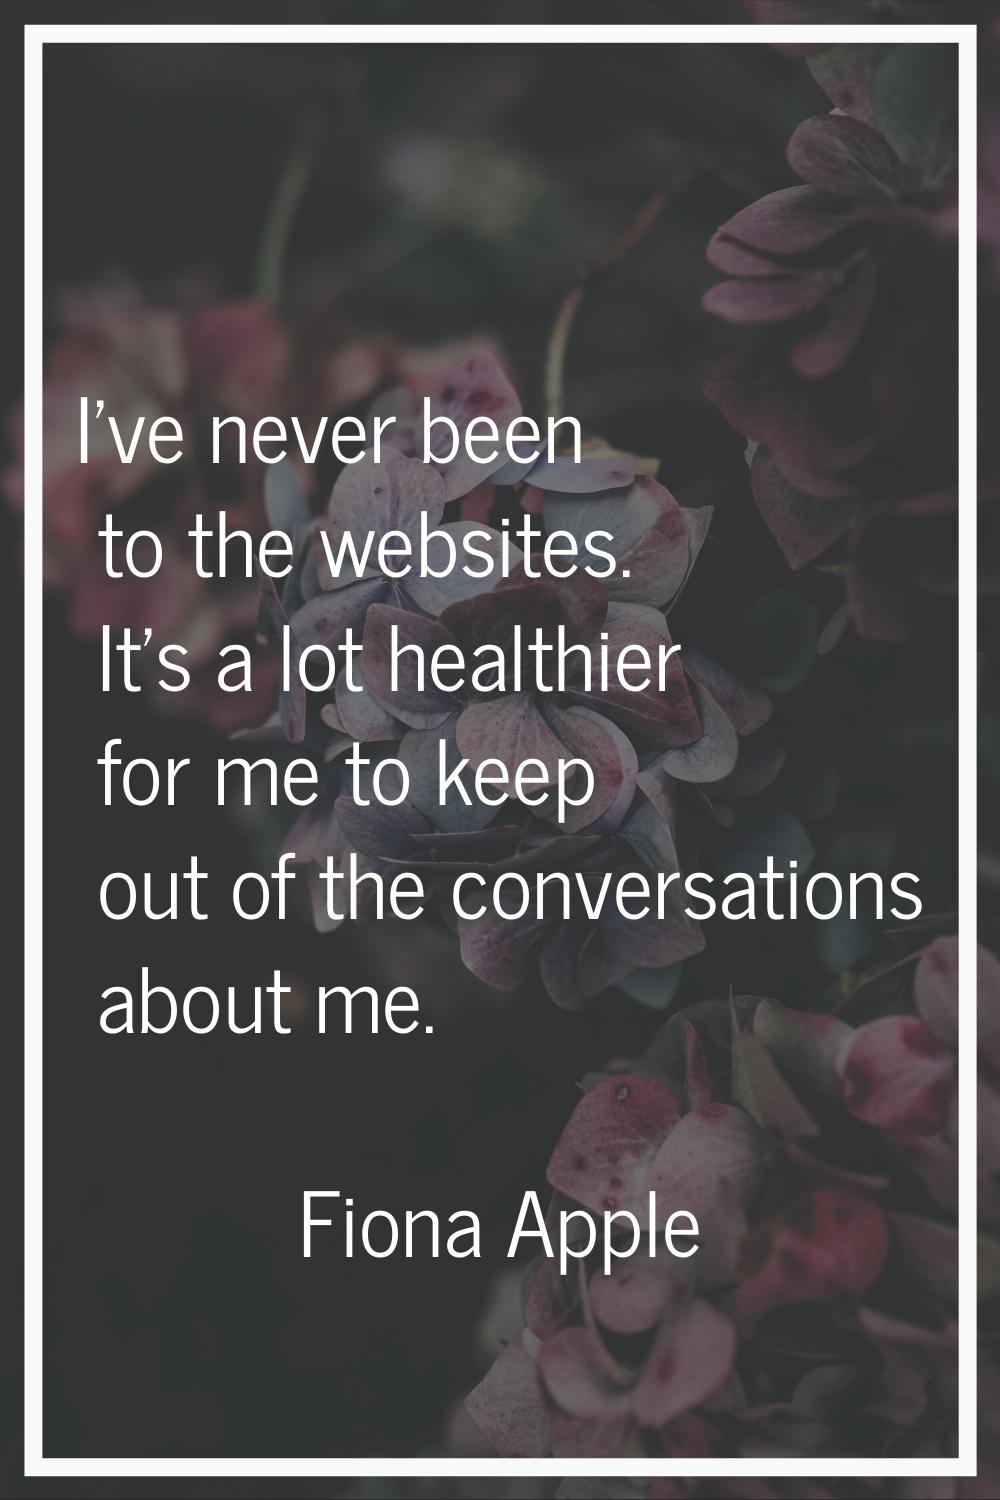 I've never been to the websites. It's a lot healthier for me to keep out of the conversations about